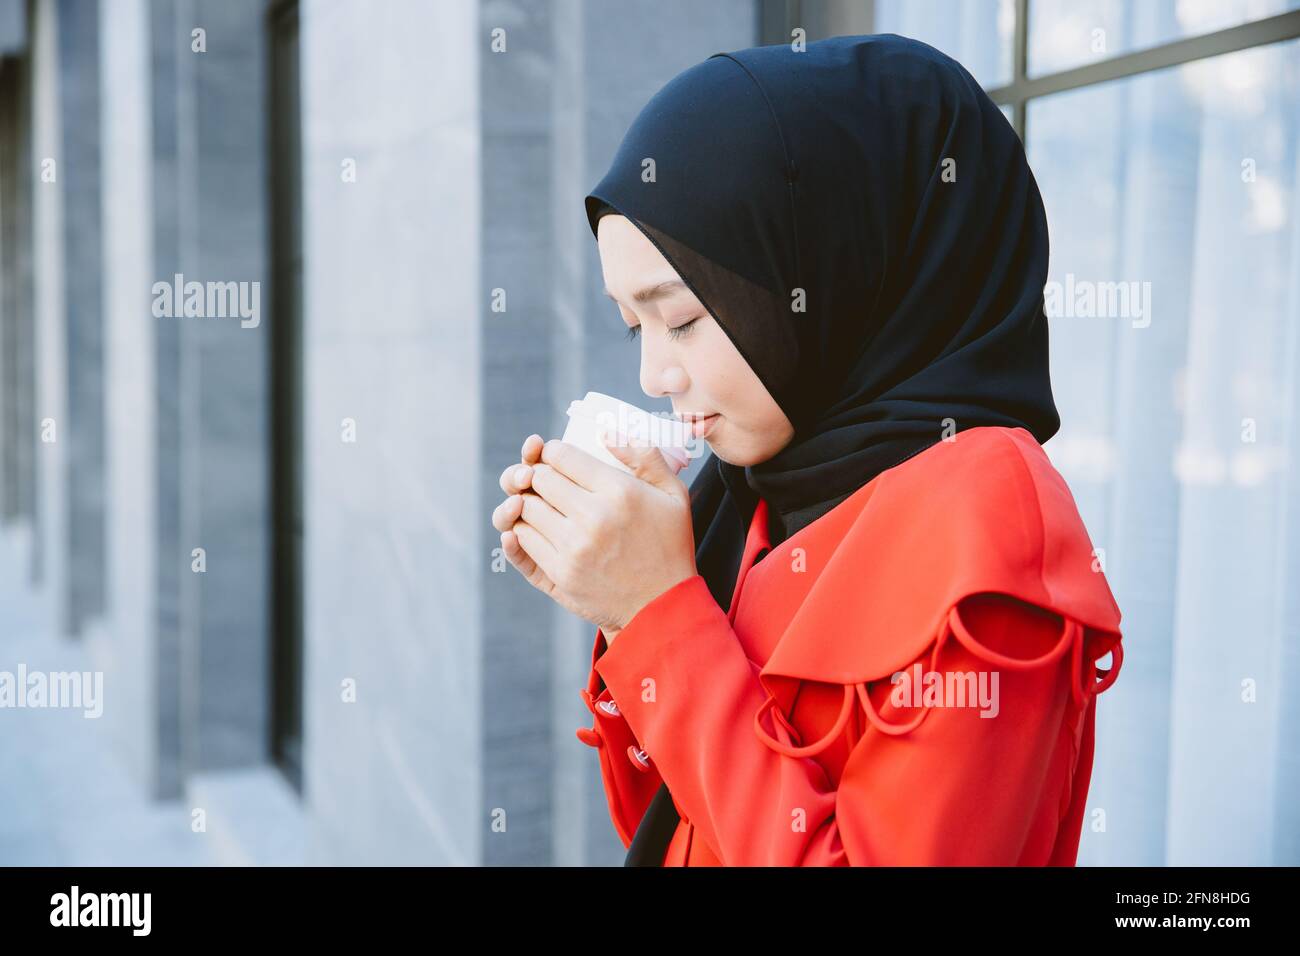 Arab Muslim women drinking coffee in the morning outdoor, Asian businesswoman young girl smiling hand hold coffee cup standing closeup. Stock Photo